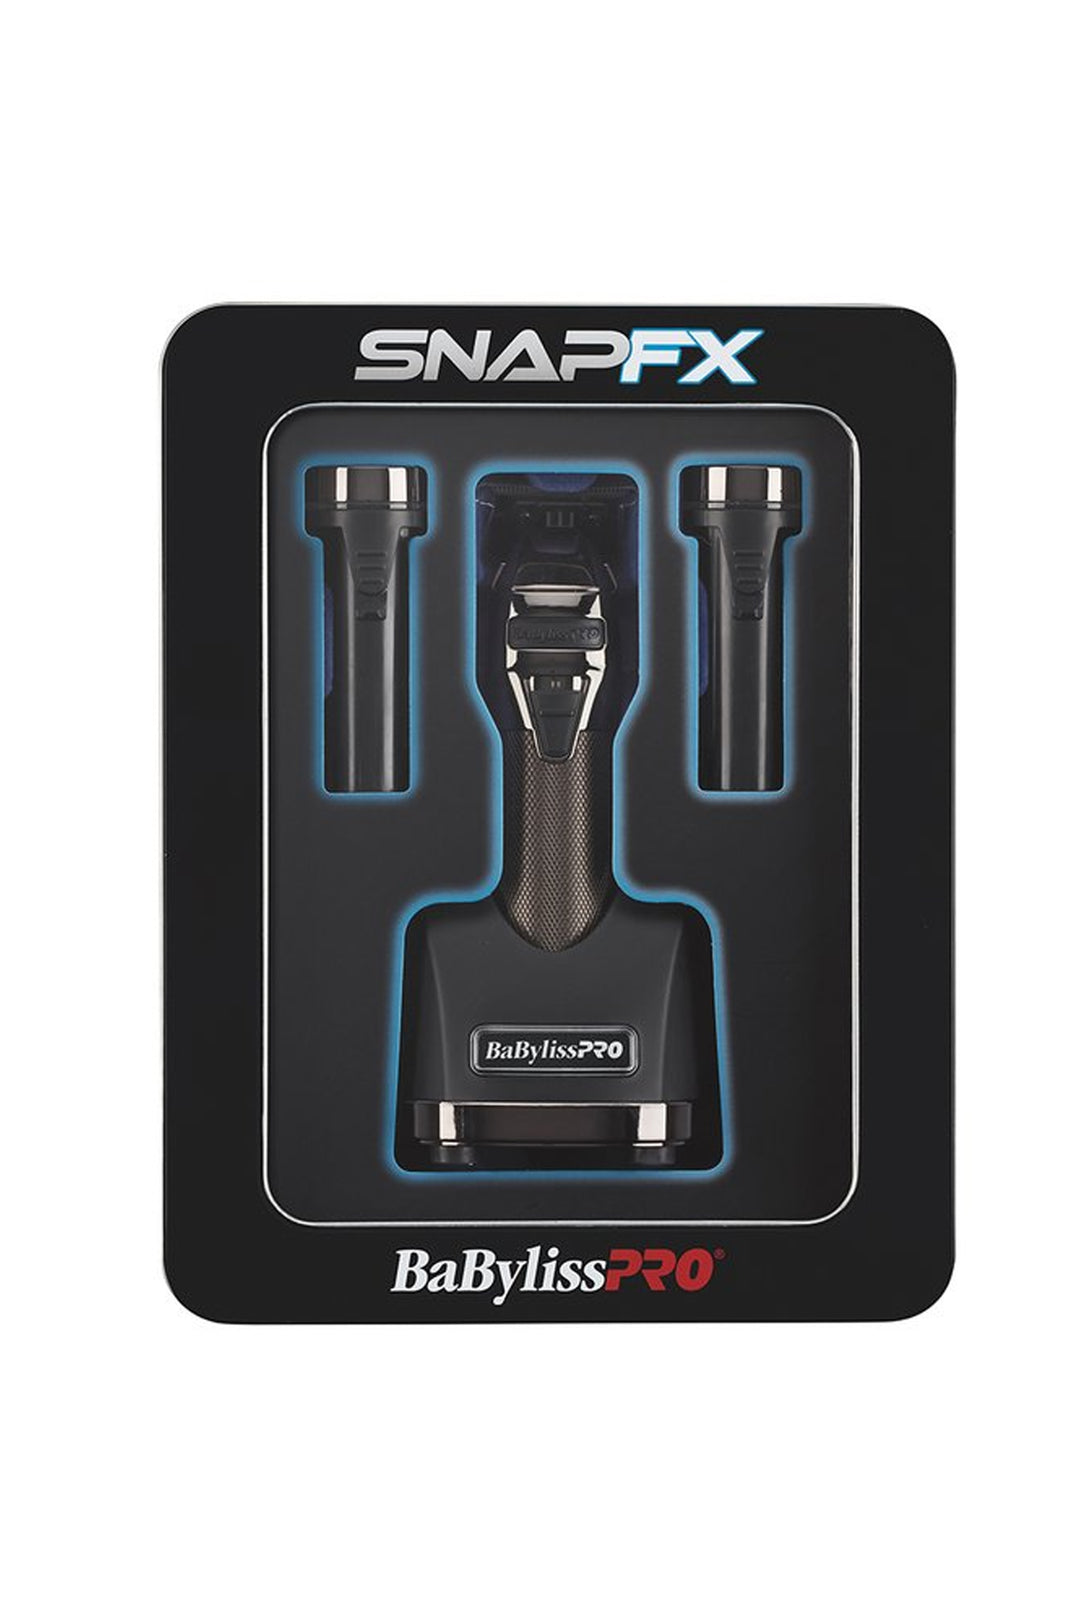 BABYLISS PRO SNAPFX TRIMMER